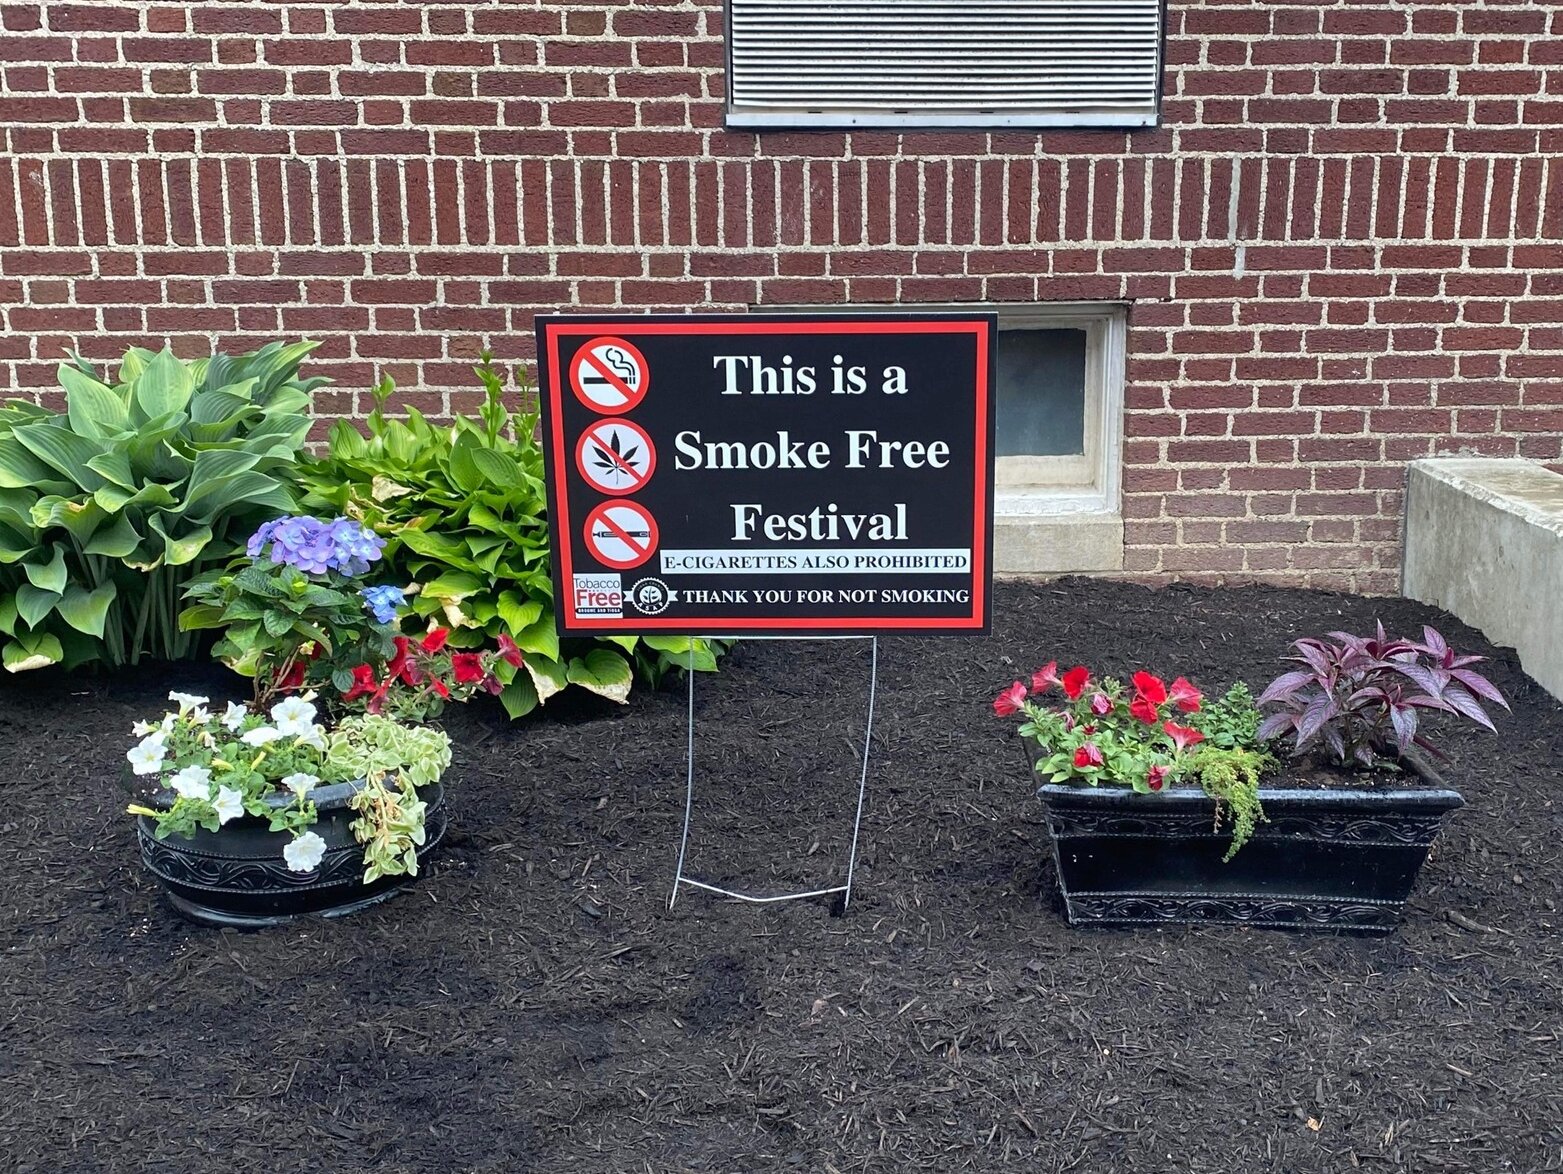 Lawn sign reads "This is a Smoke Free Festival"